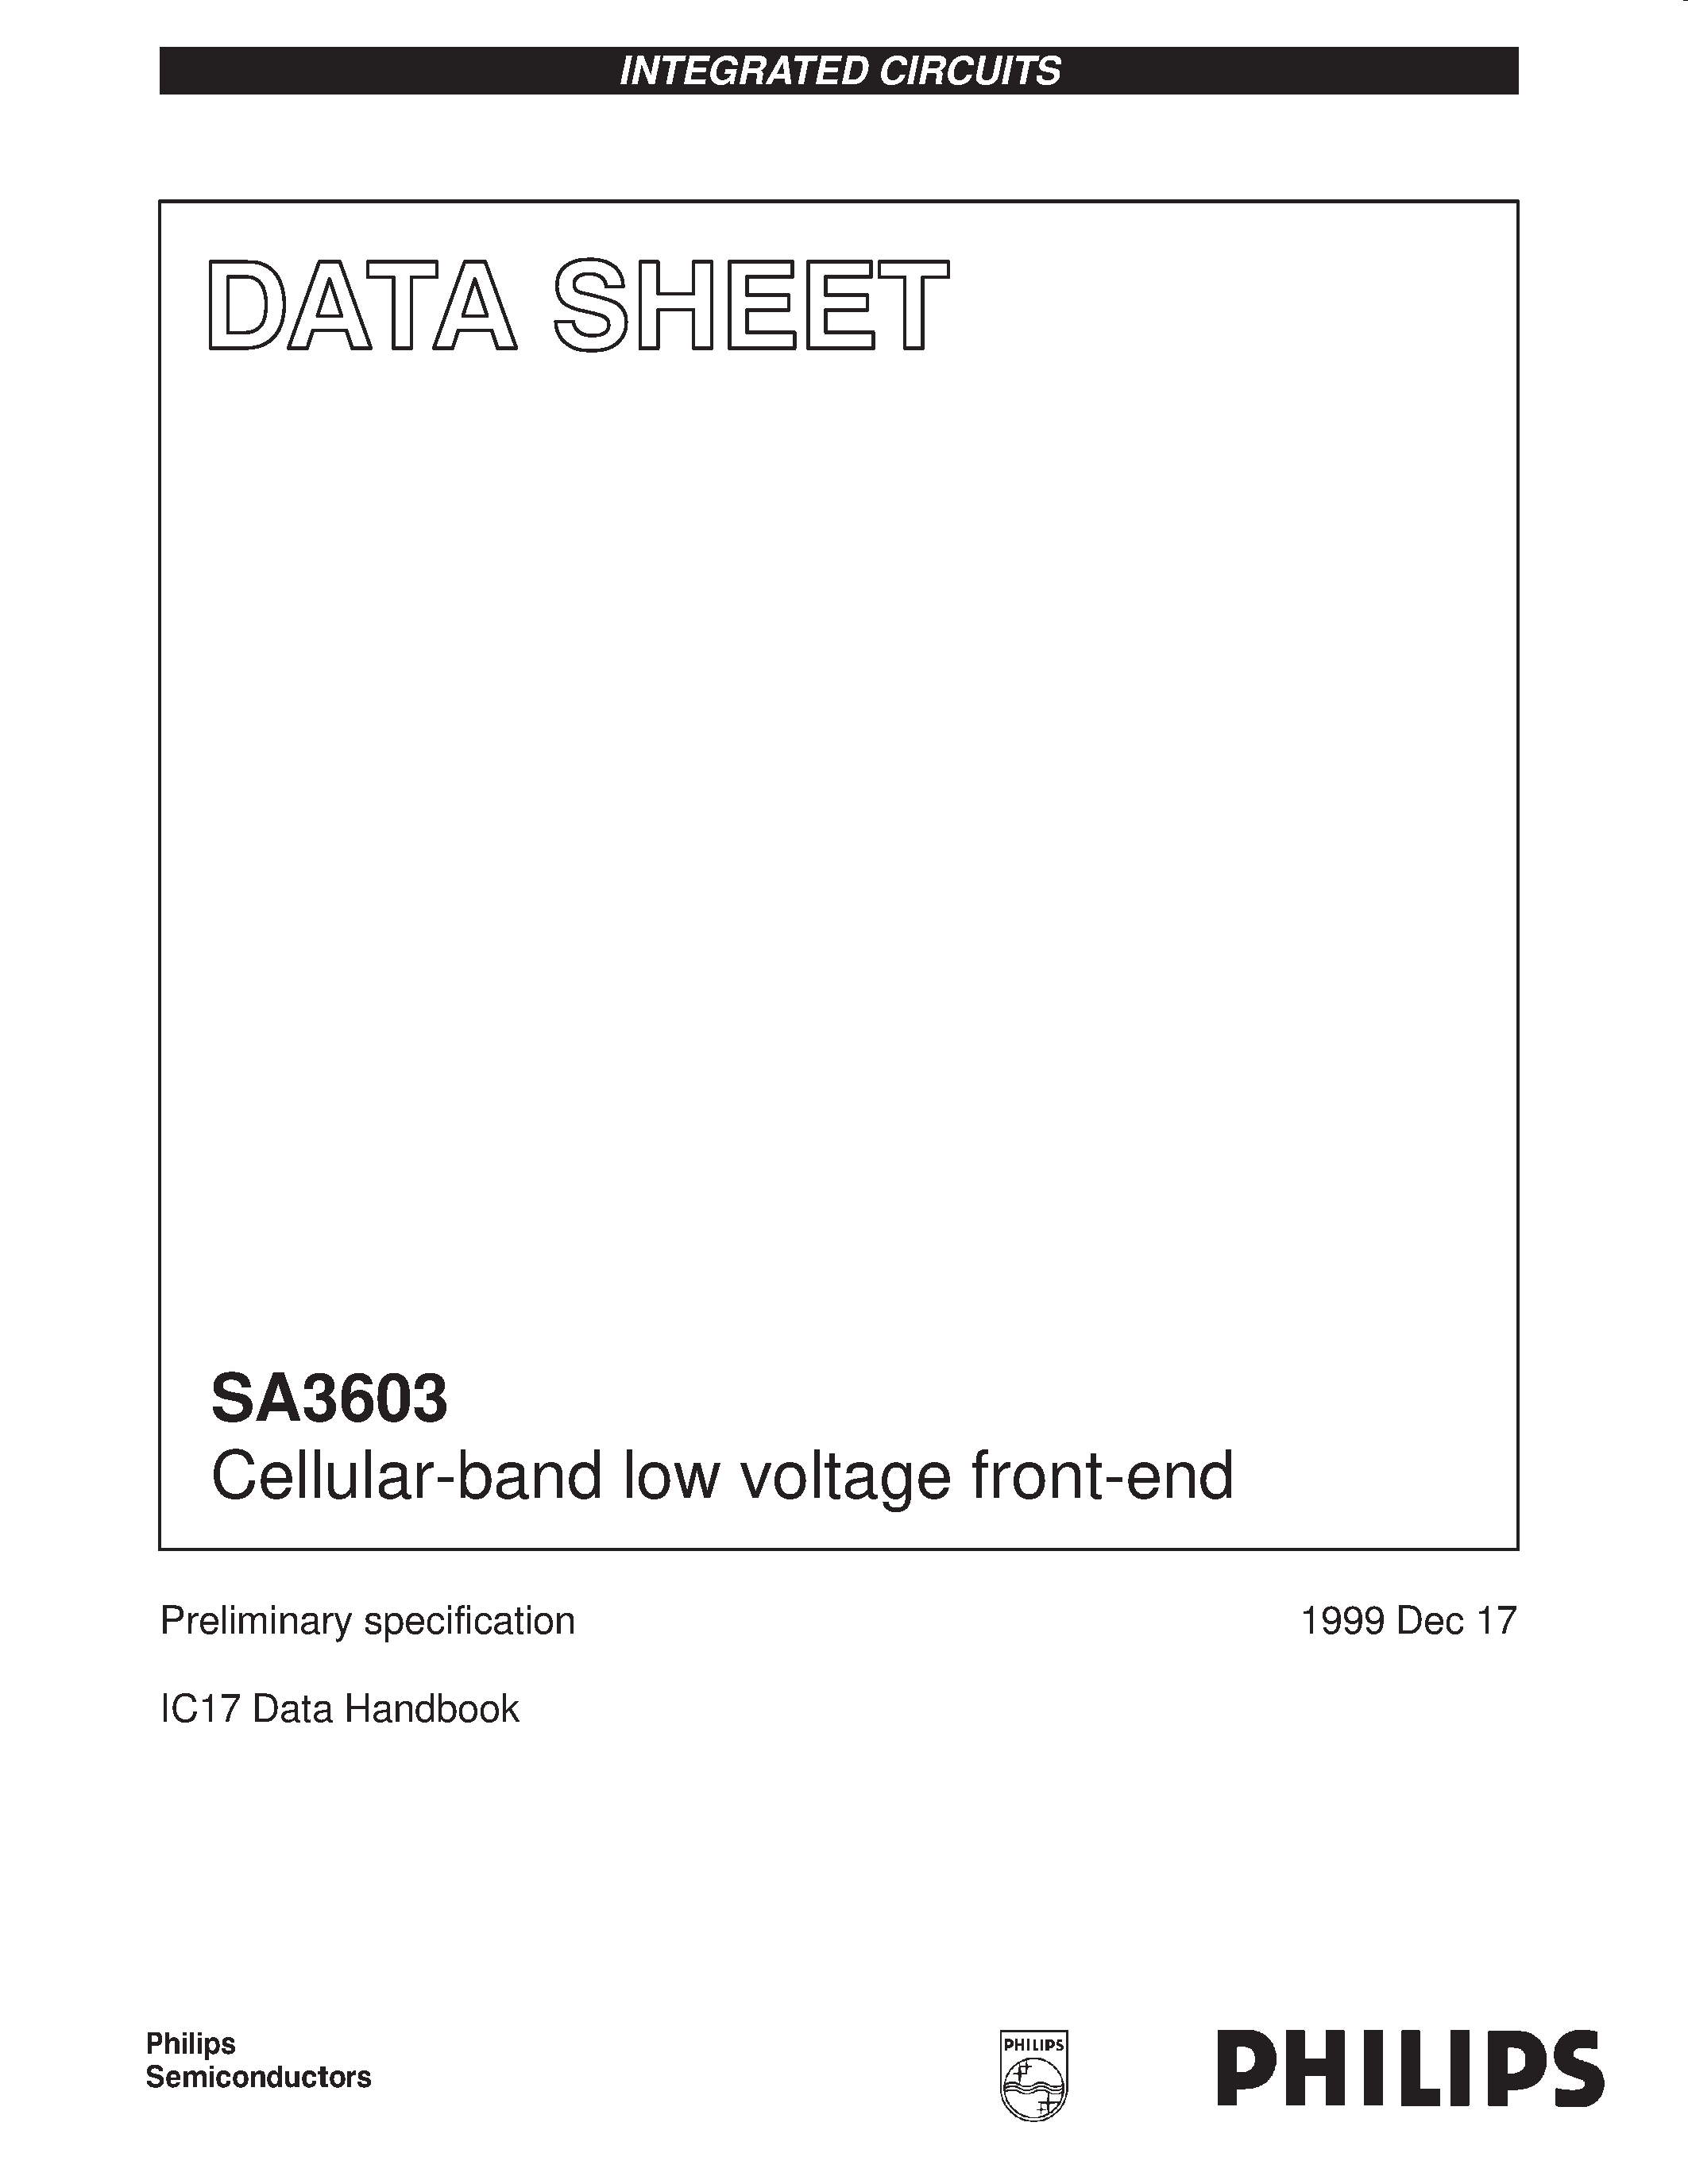 Даташит SA3603DH - Cellular-band low voltage front-end страница 1